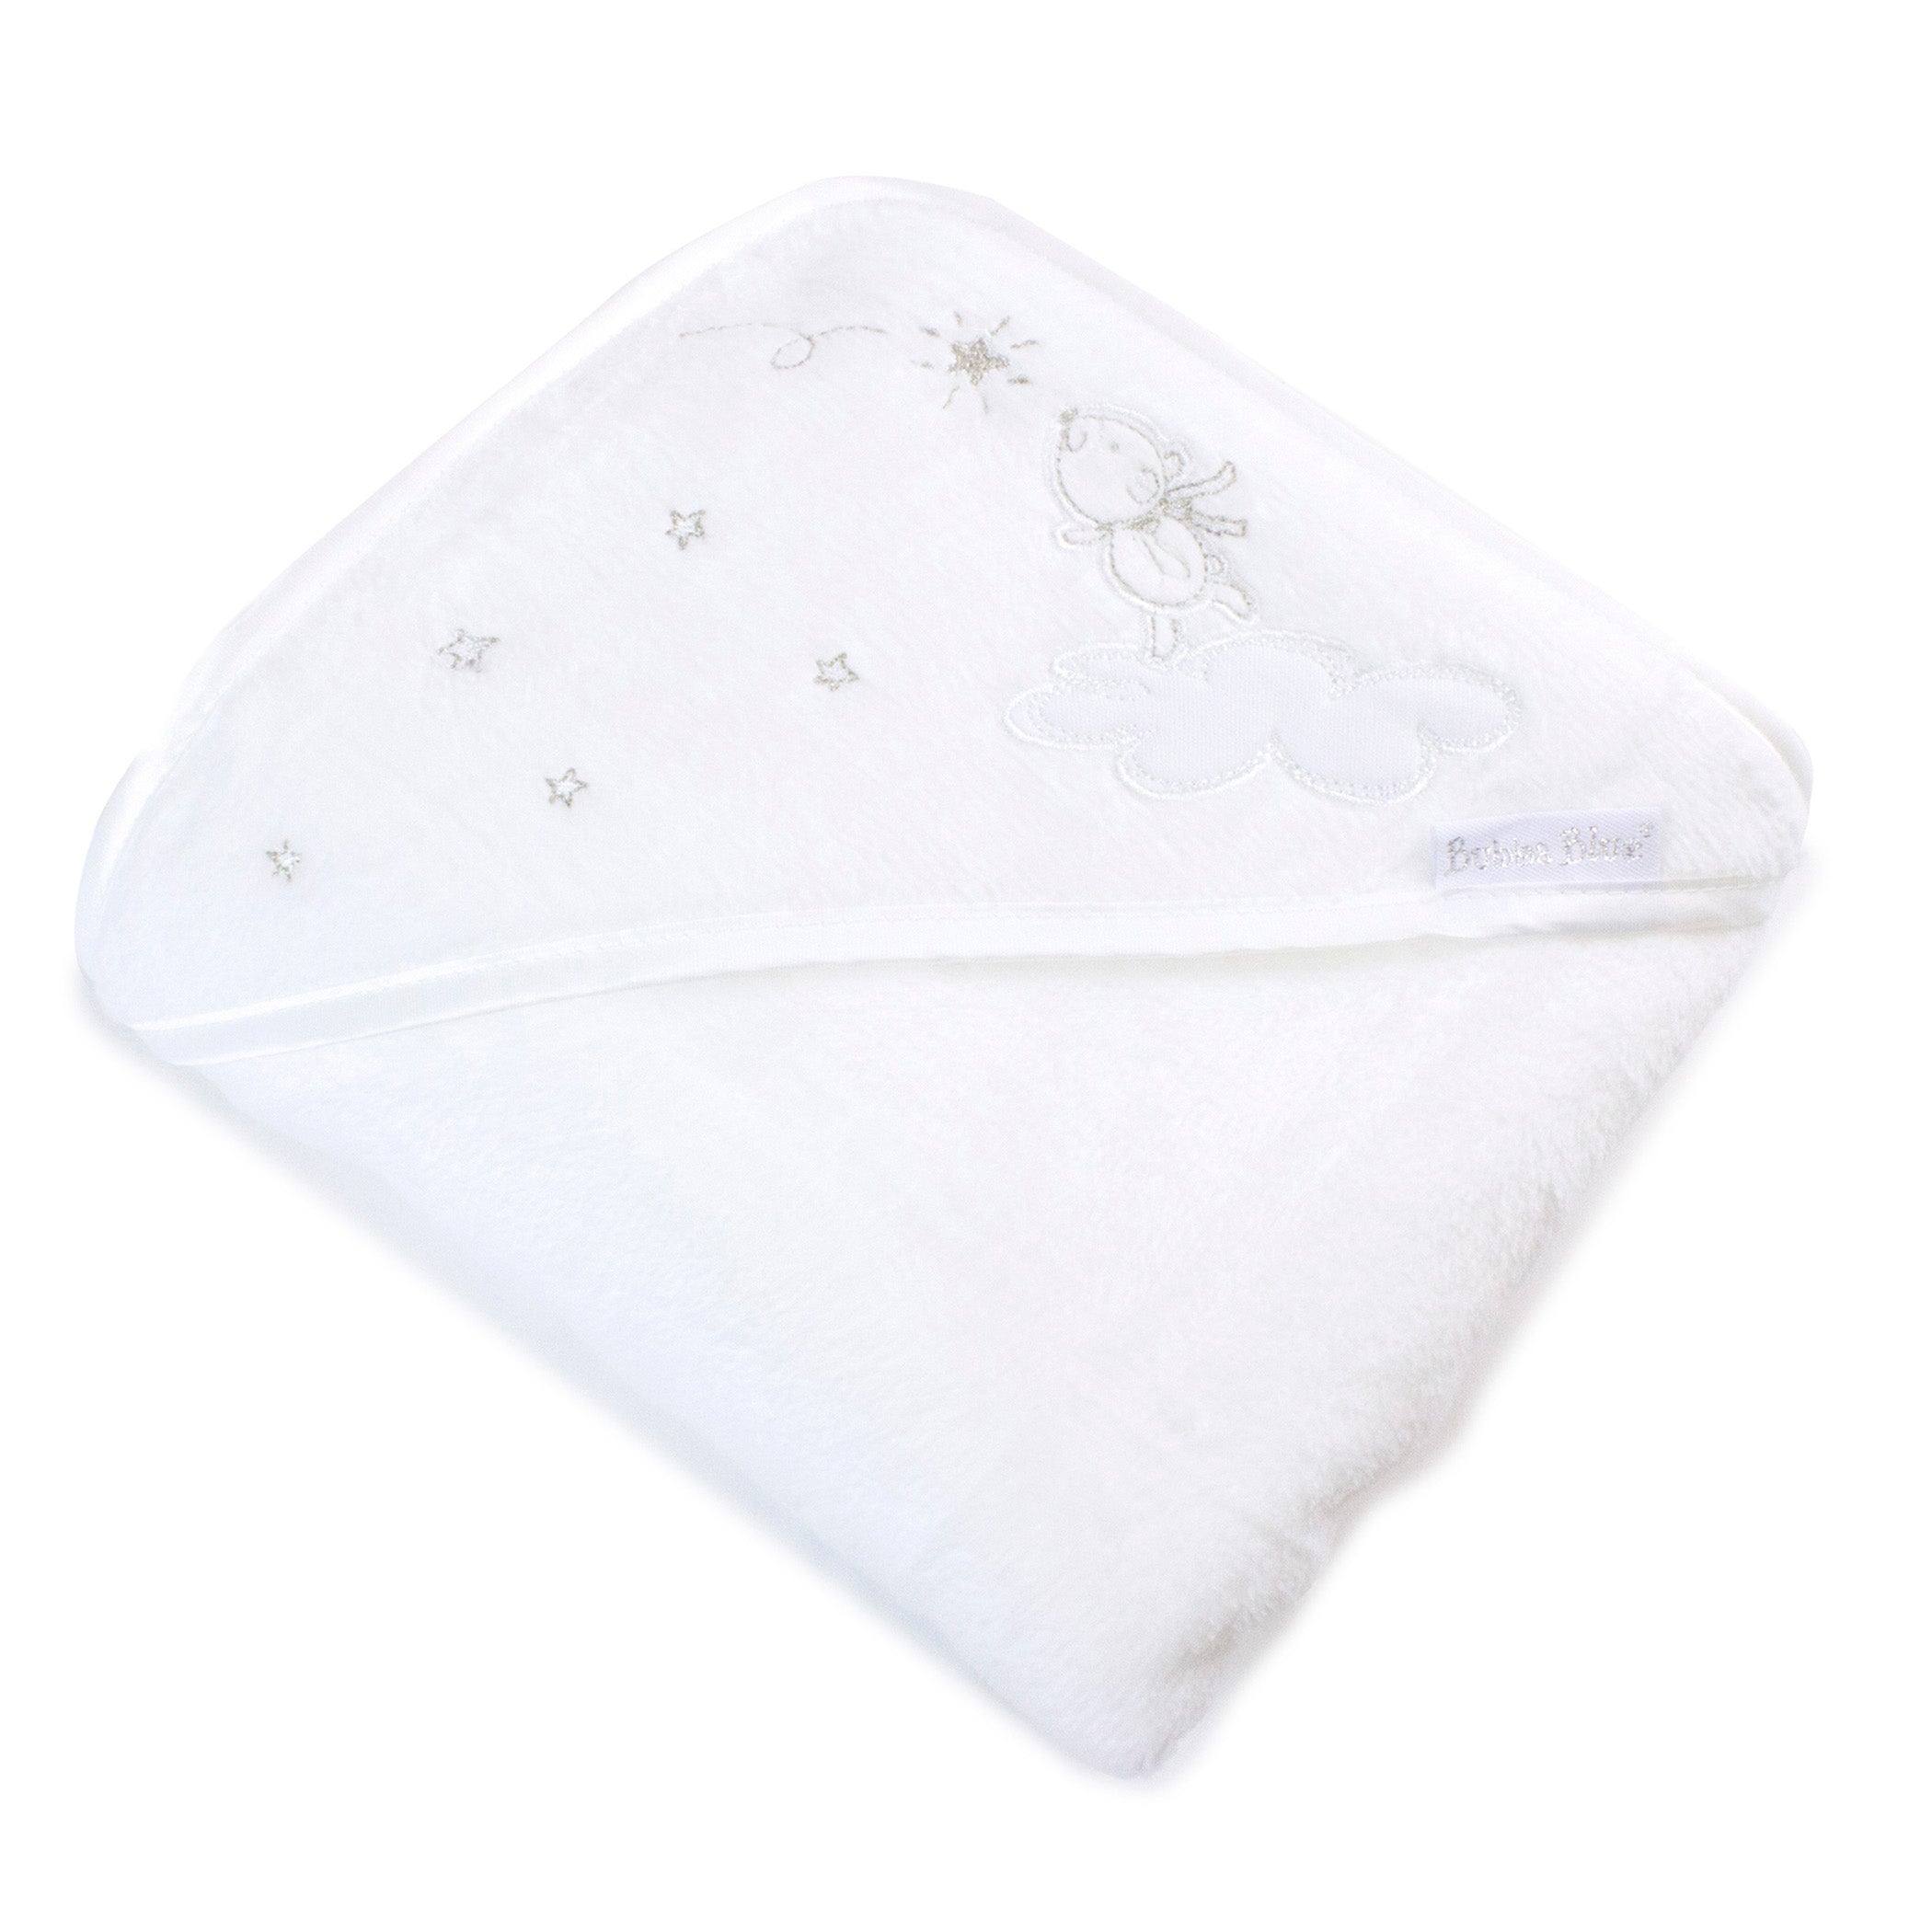 Wish Upon A Star Hooded Towel